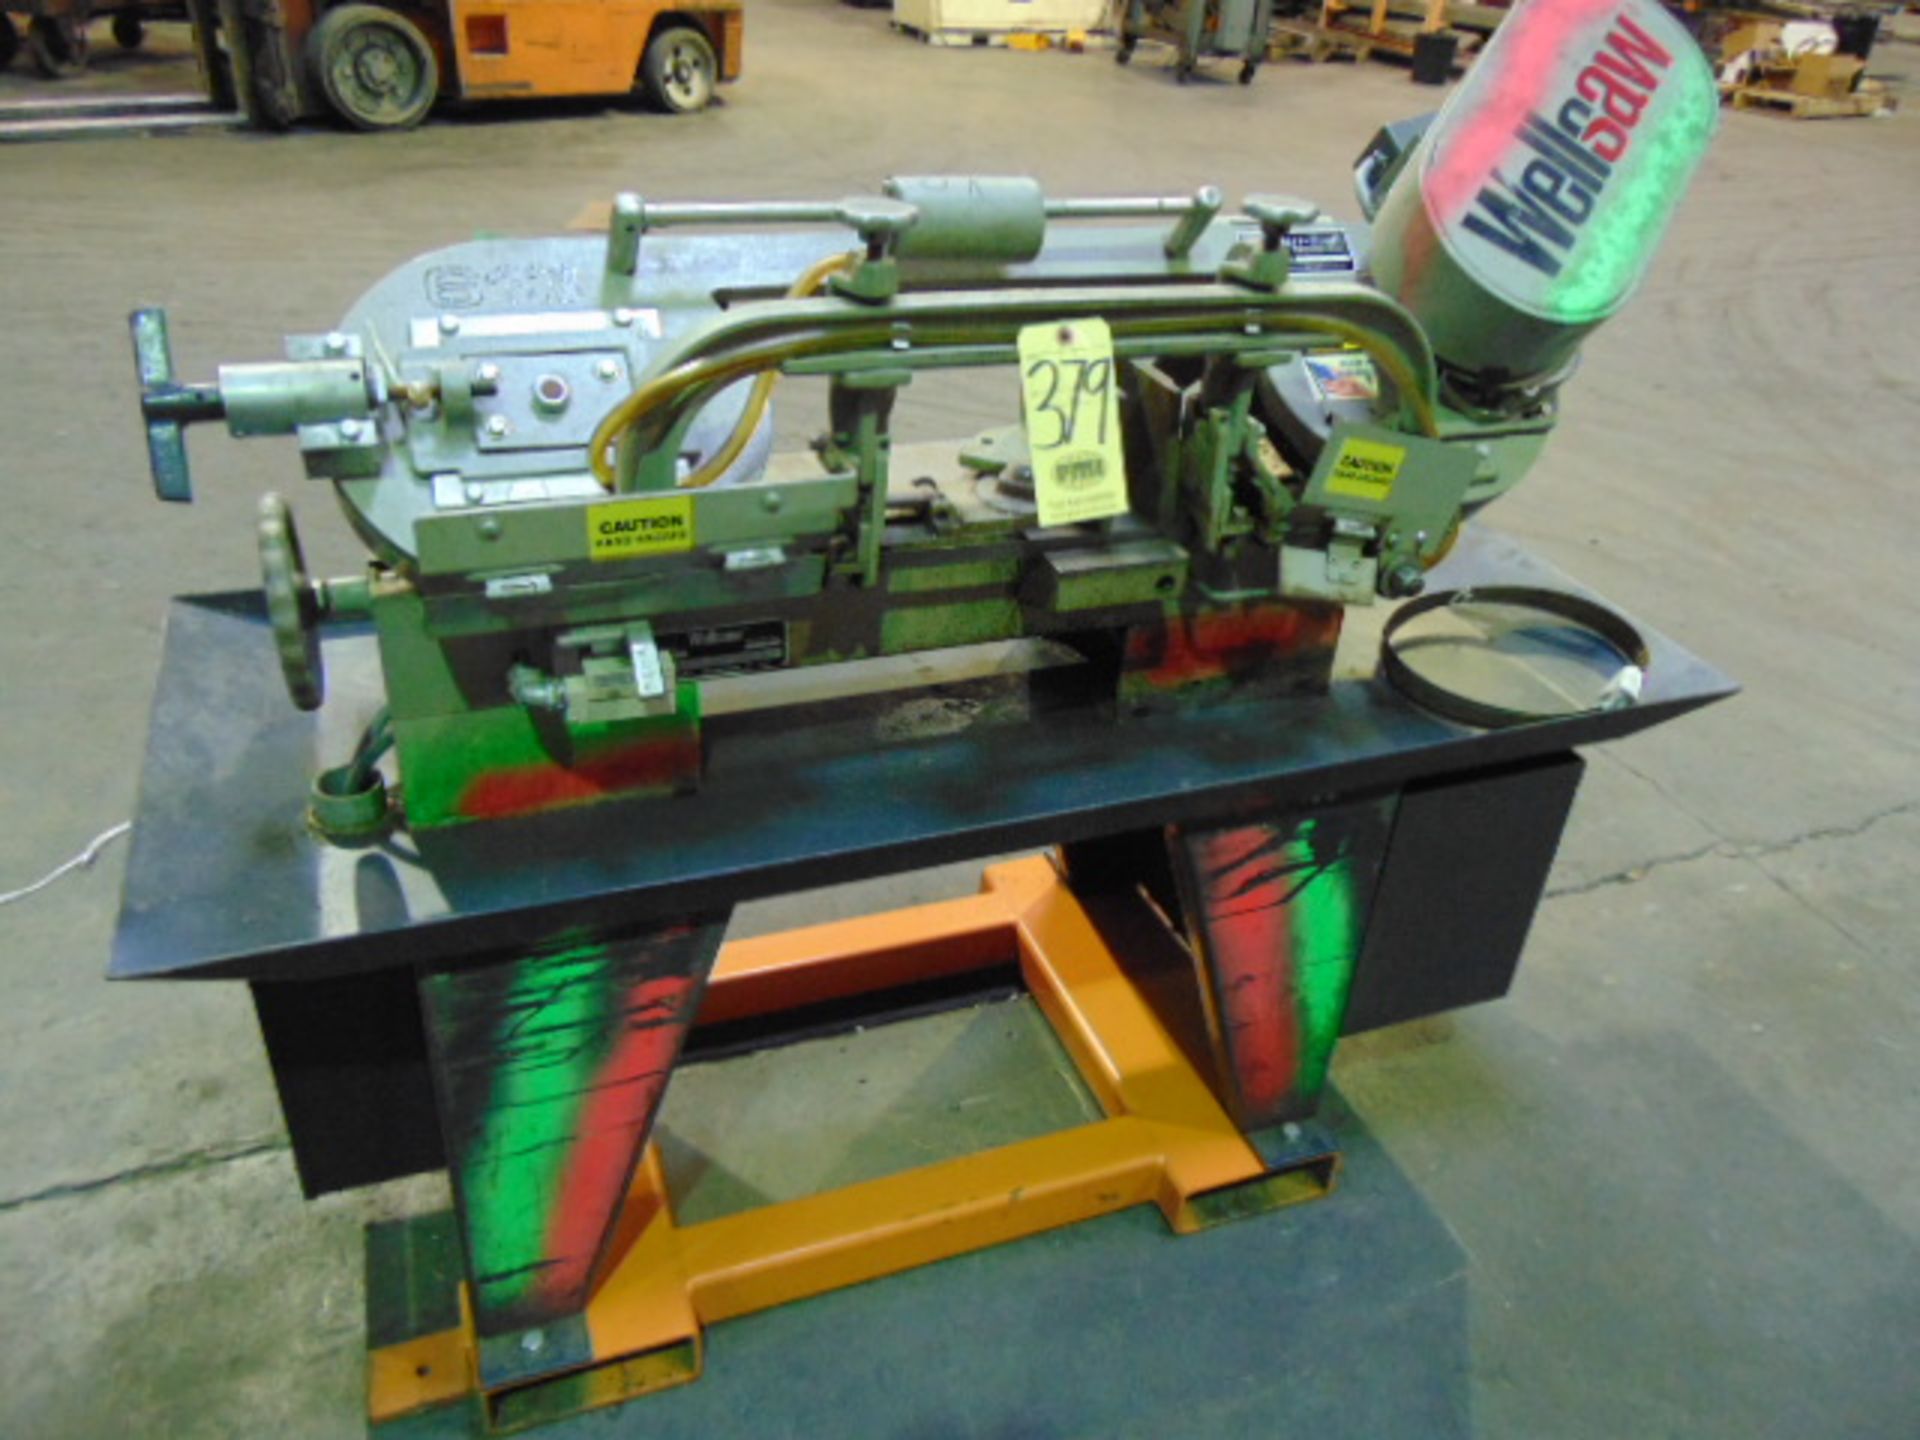 HORIZONTAL BANDSAW, WELLSAW MDL. 613, ¾” blade size, fabricated forklift entry skid, S/N 1729